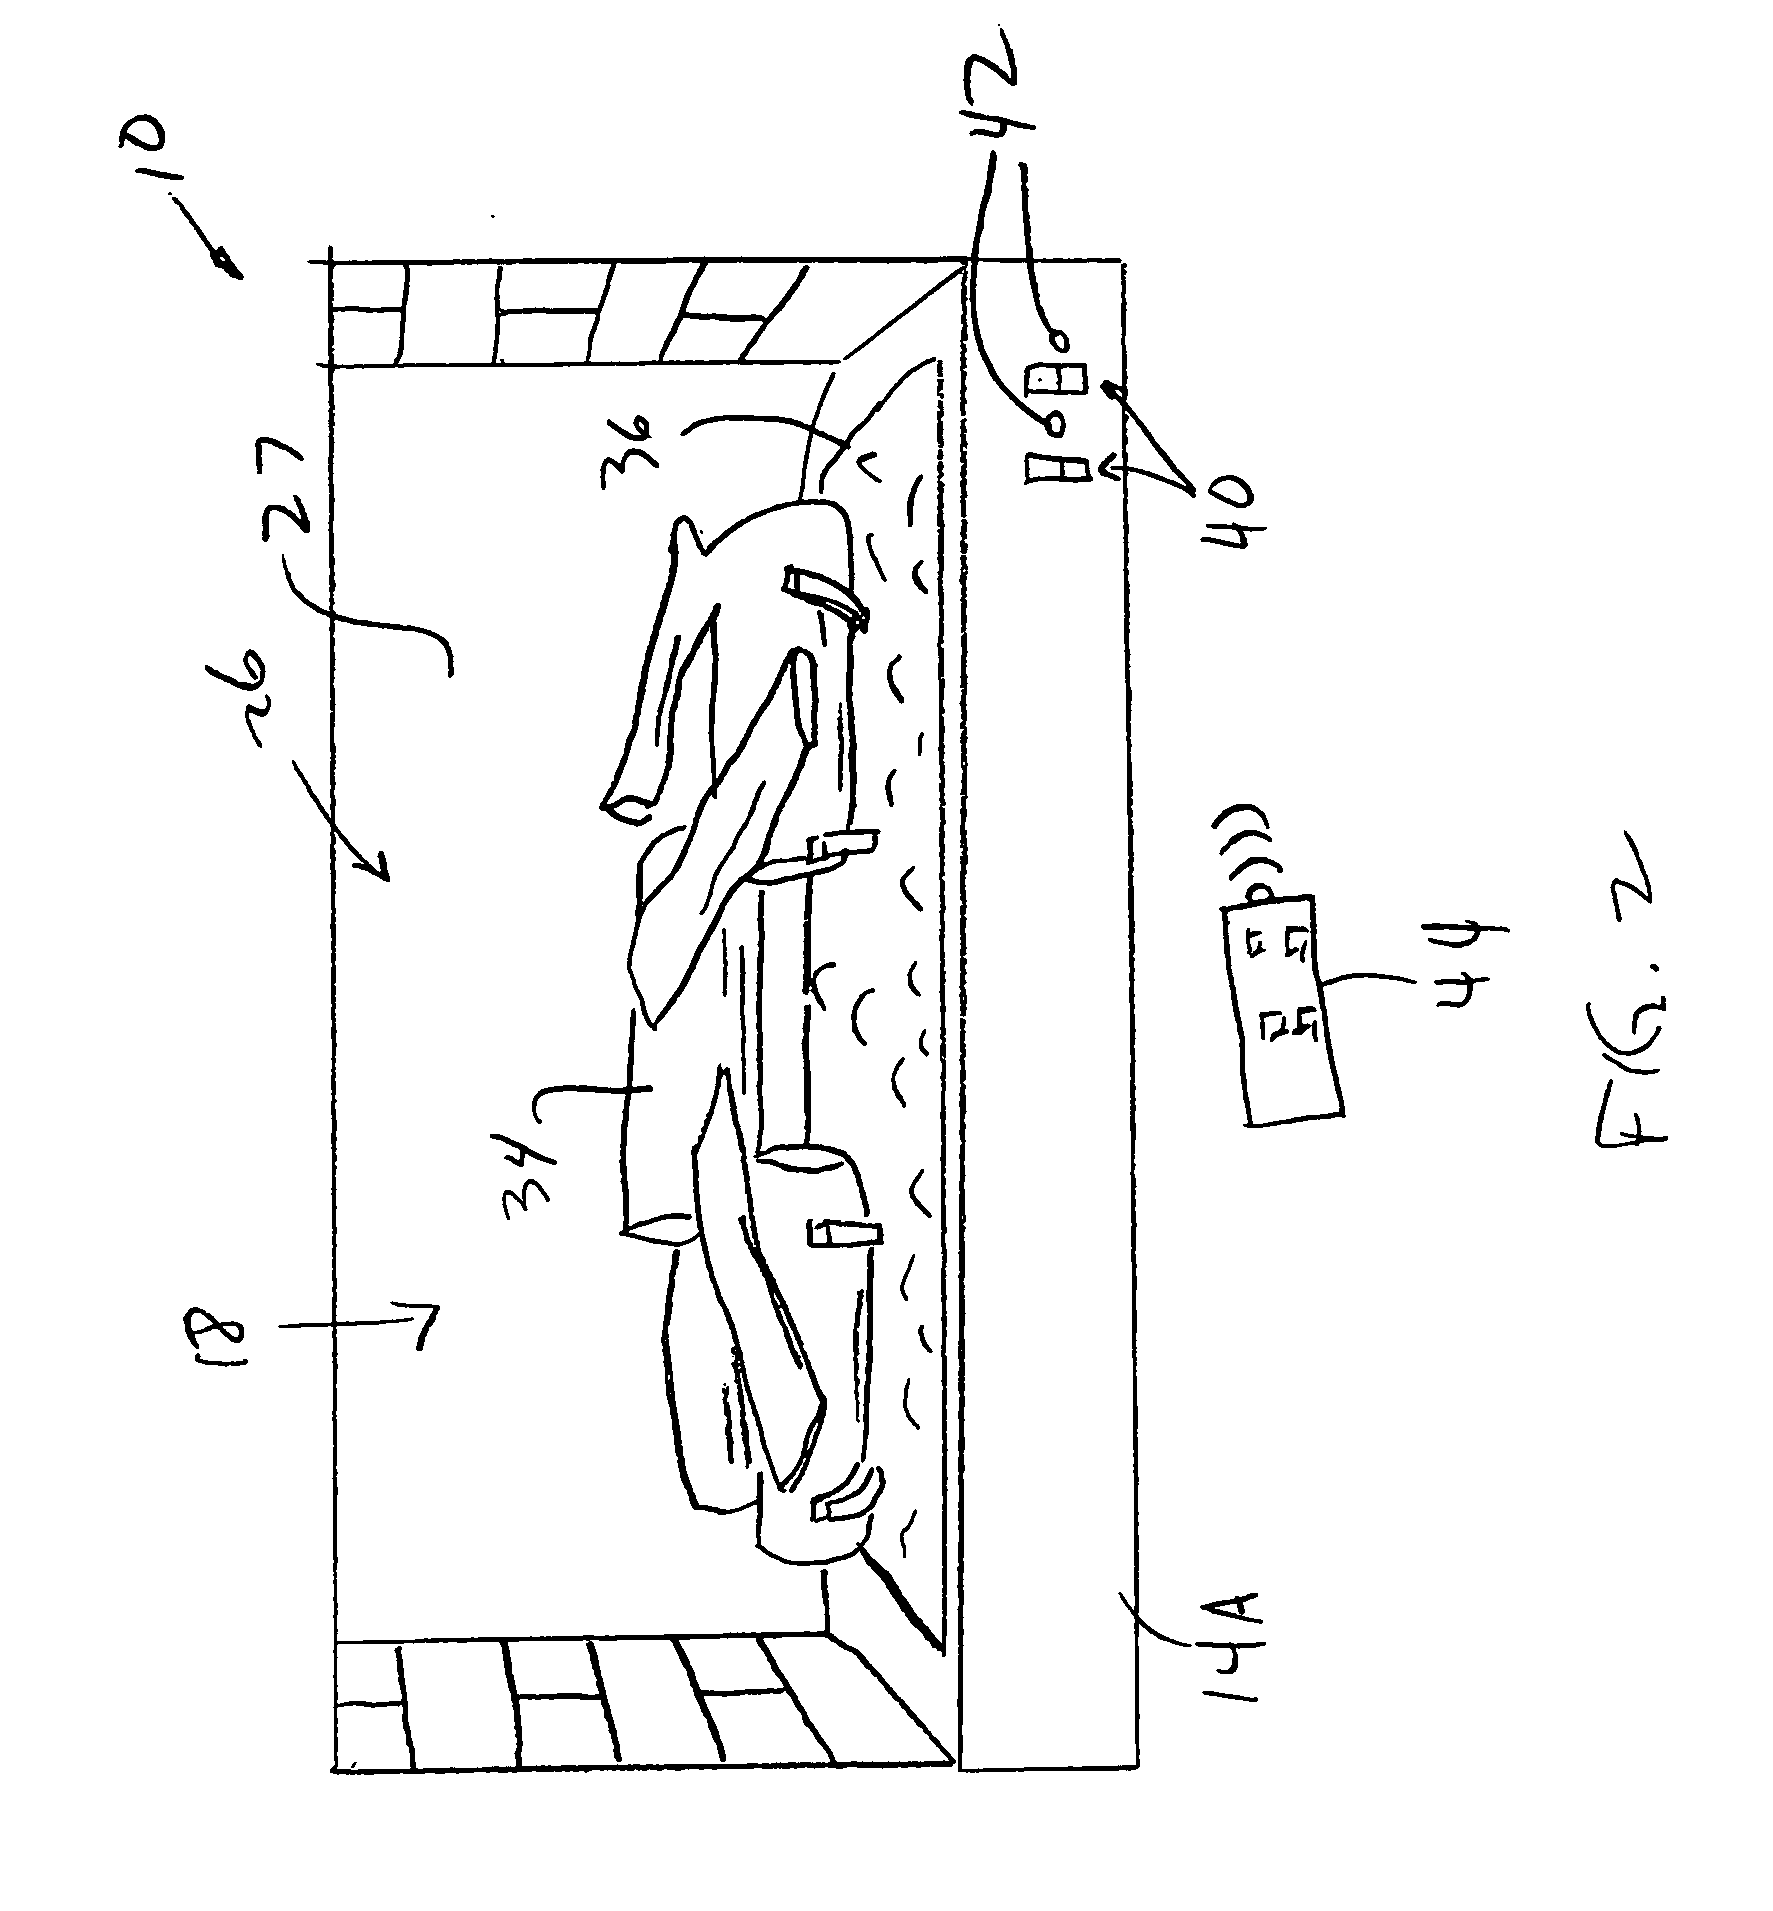 Apparatus and method for simulation of combustion effects in a fireplace